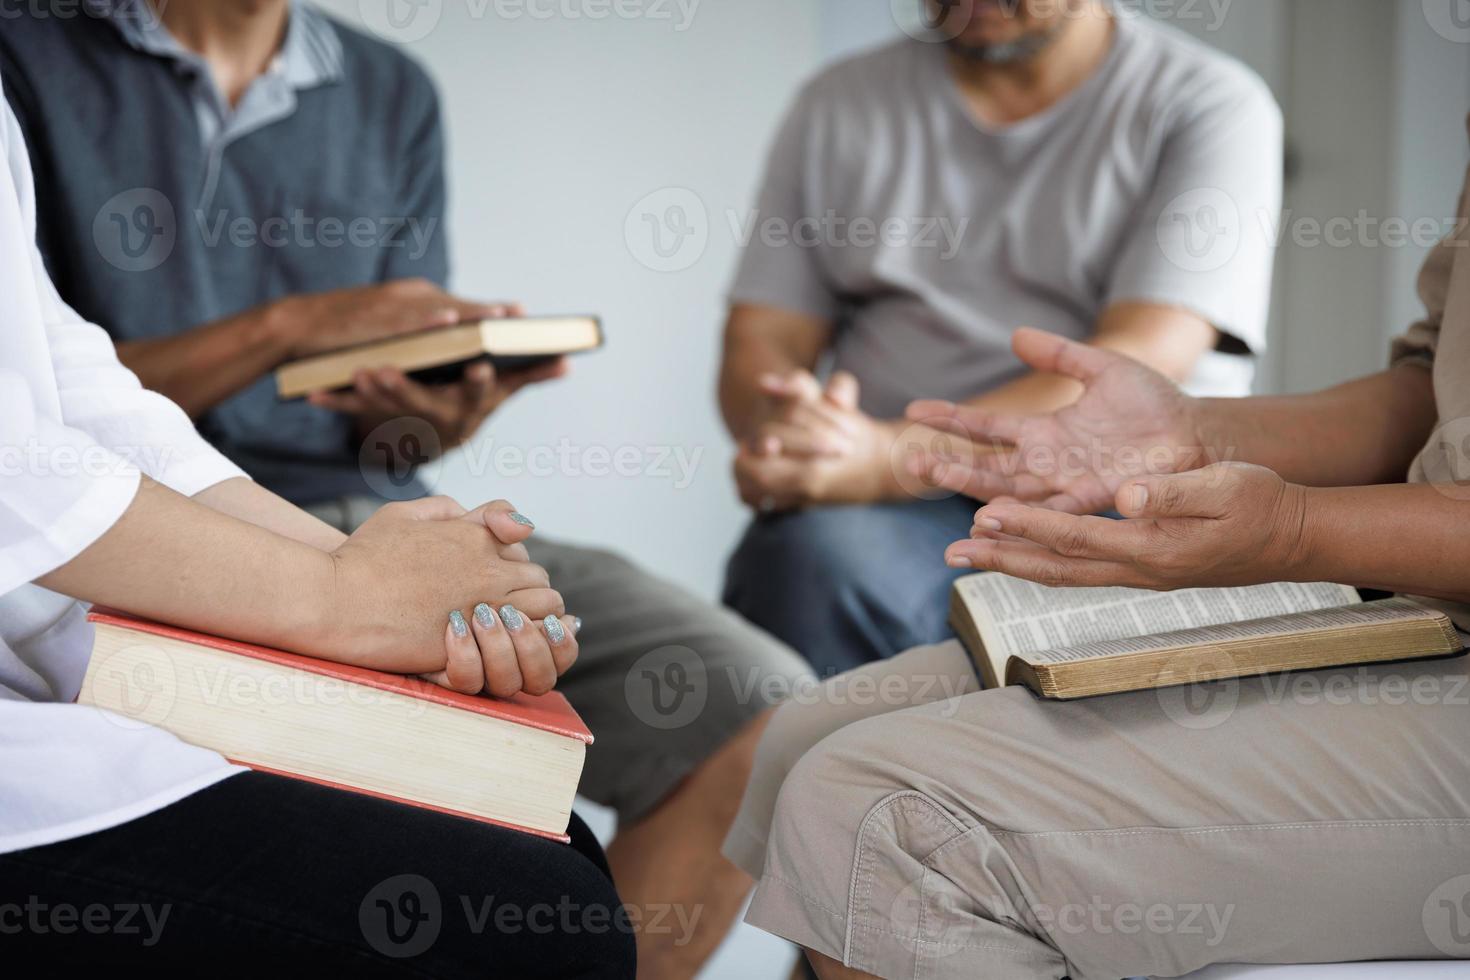 Group of christianity people praying hope together,Diverse religious shoot, Hope conceptsFaithChristianityReligionChurch online photo